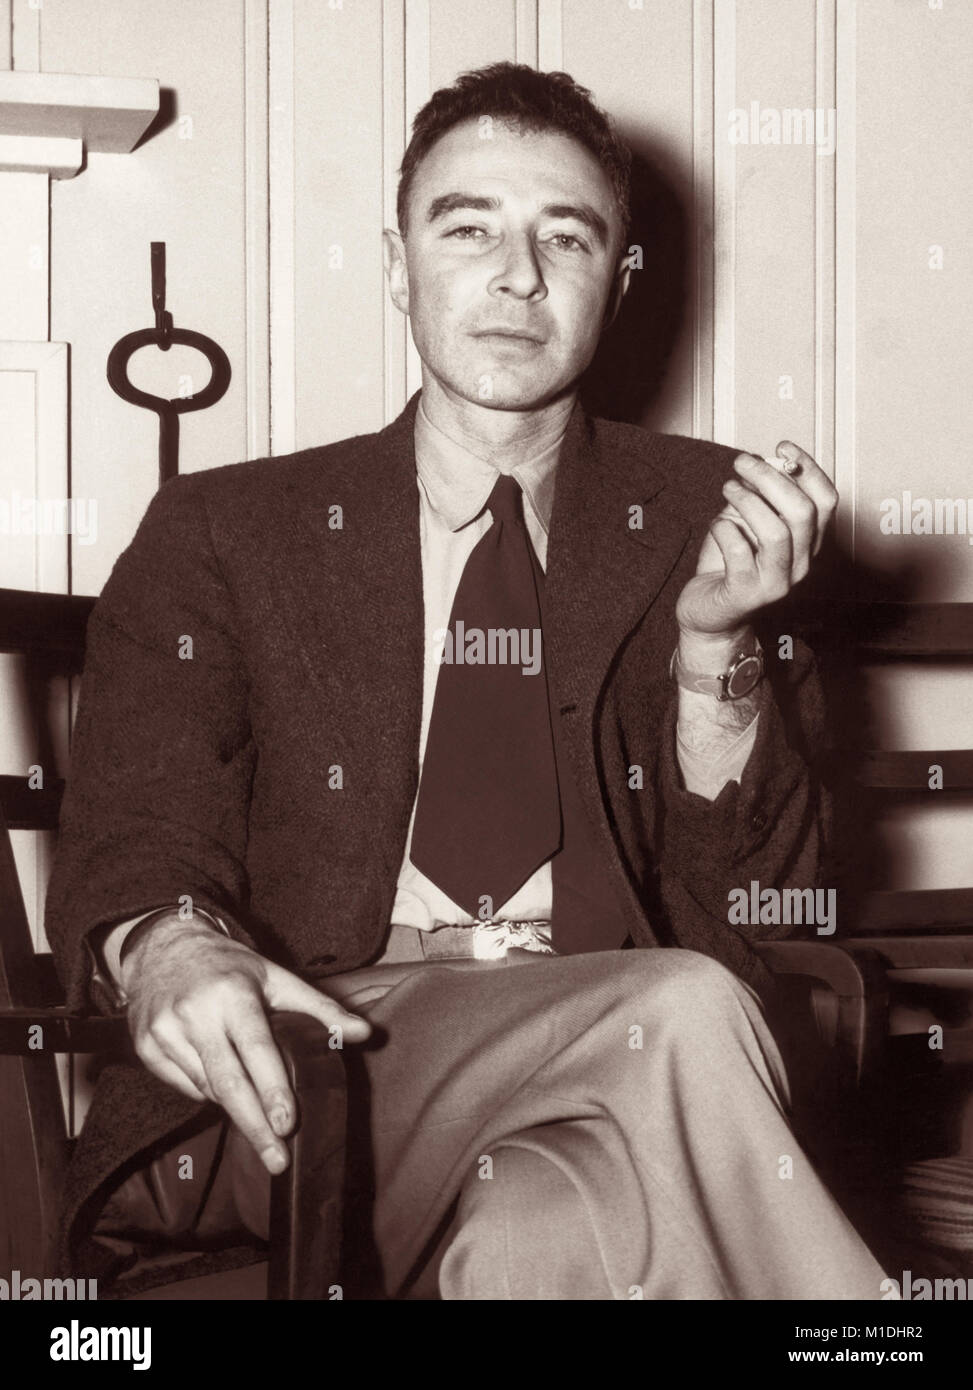 J. Robert Oppenheimer (1904–1967) was an American theoretical physicist and participant in the Manhattan Project's development of the atomic bomb during World War II as wartime head of the Los Alamos Laboratory in New Mexico. Oppenheimer is pictured here at the Guest House (Alexander Inn) at Oak Ridge, Tennessee in a photograph by Ed Wescott on February 14, 1946. Stock Photo